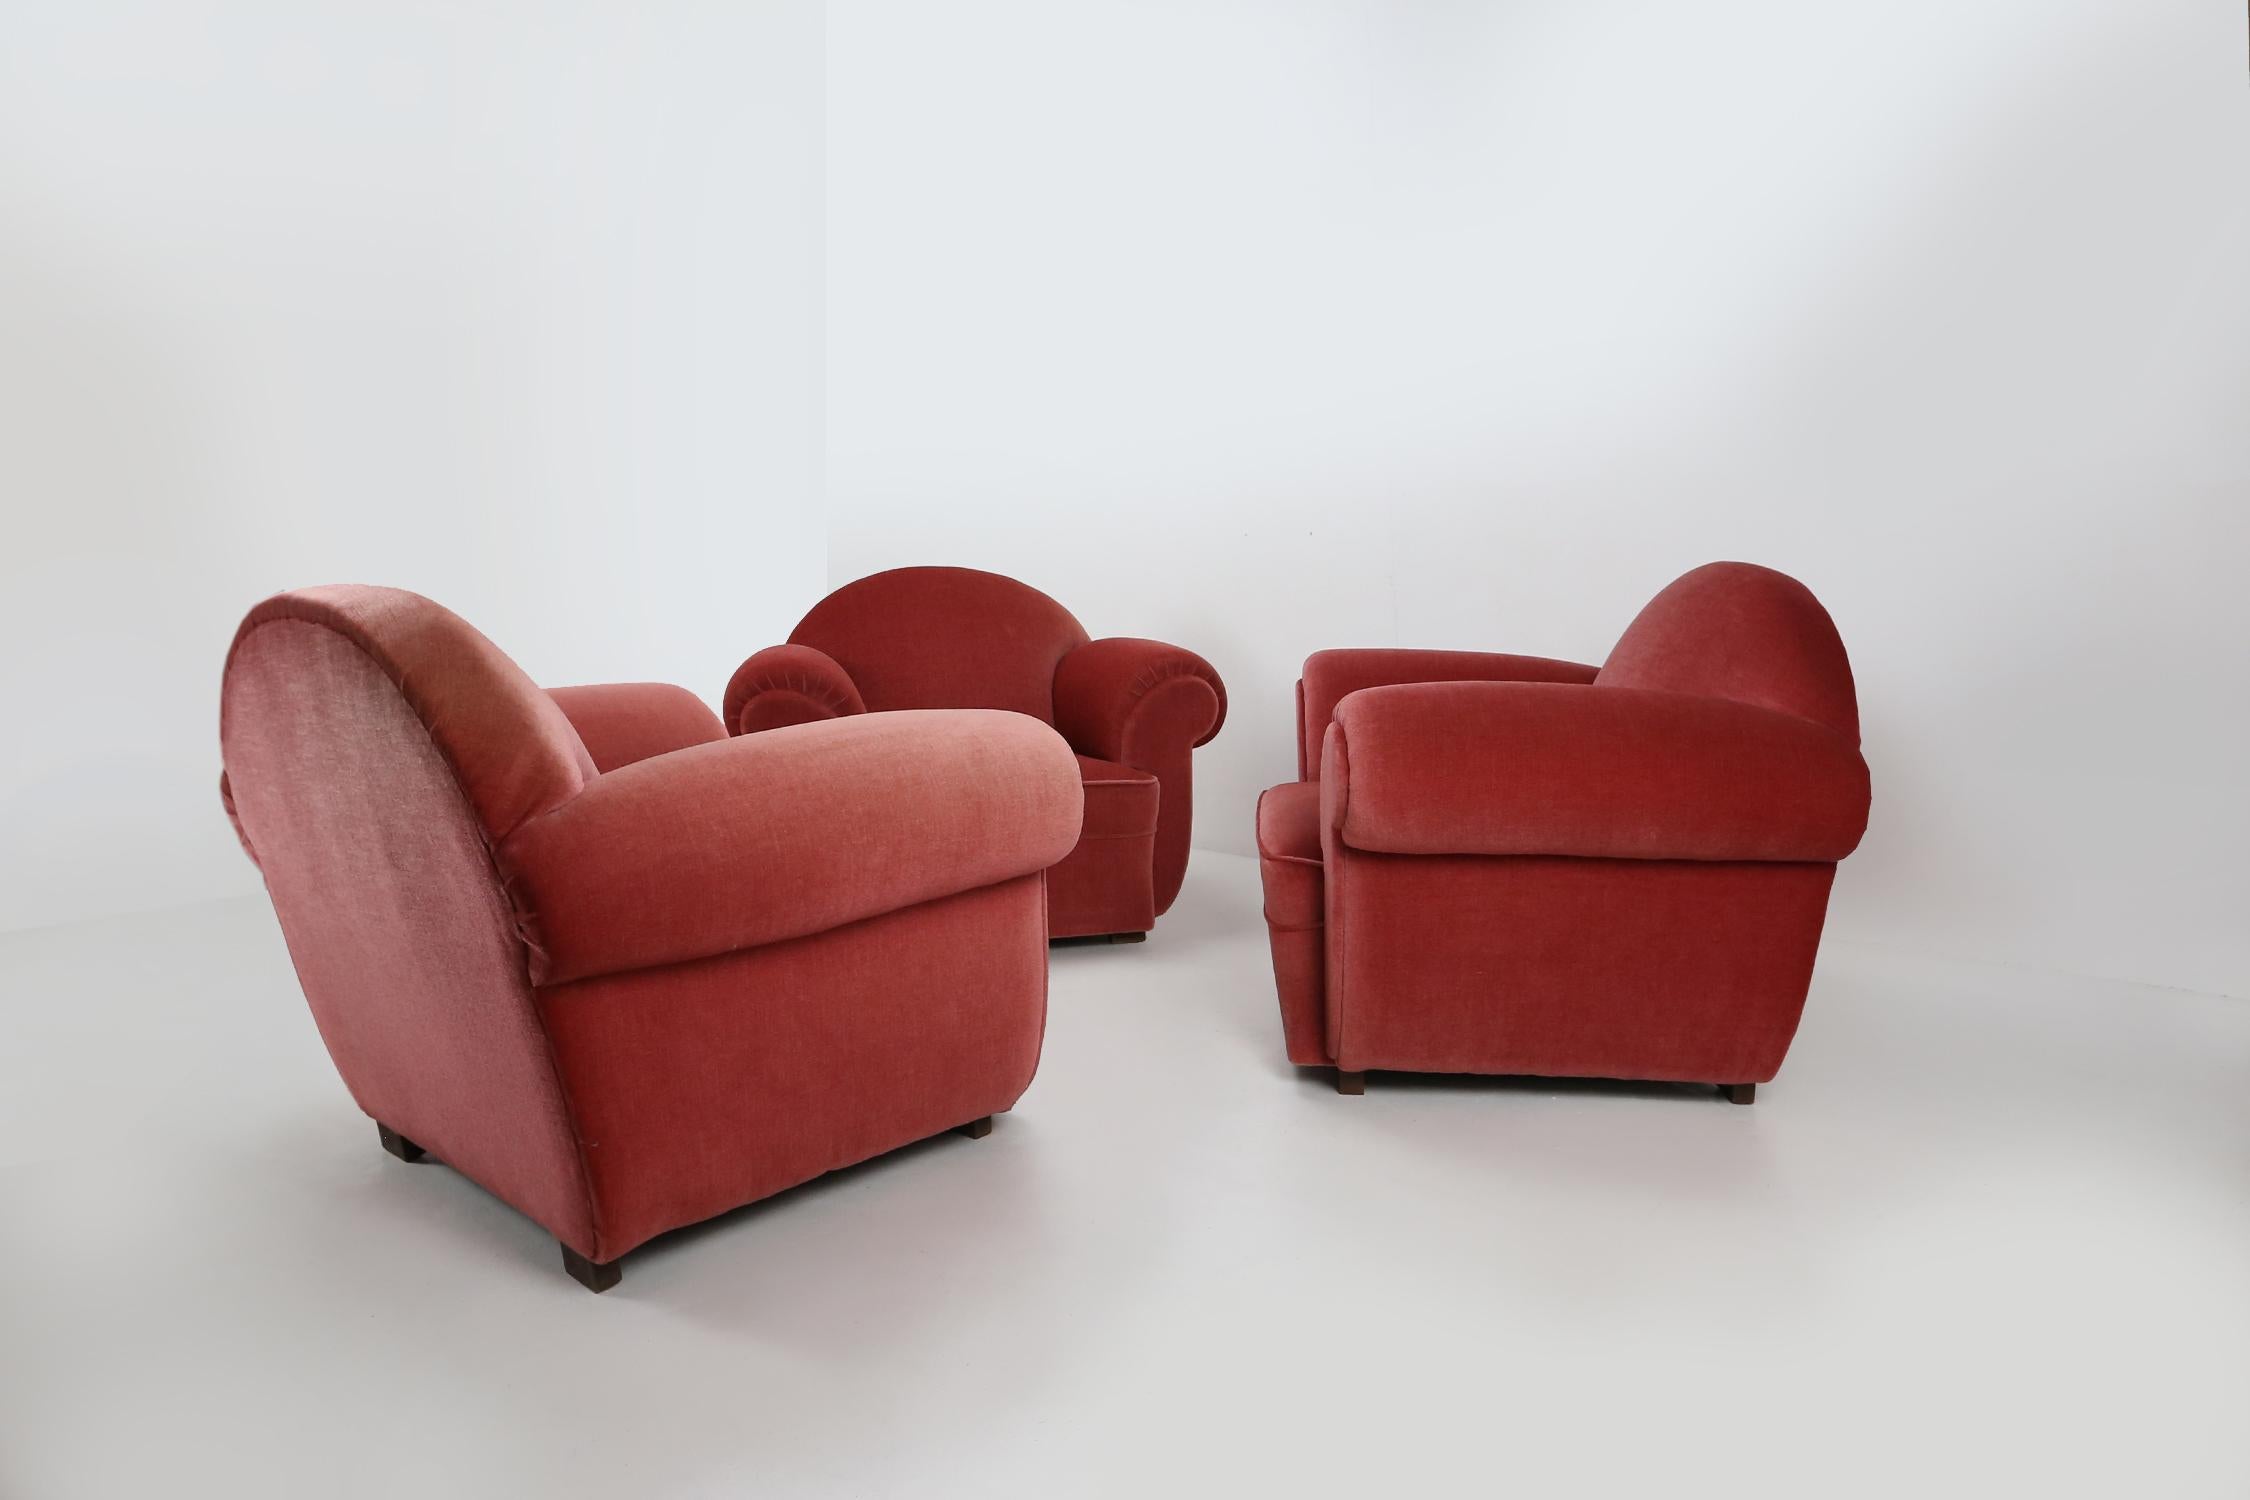 French Art Deco armchairs in red upholstery, 1930 For Sale